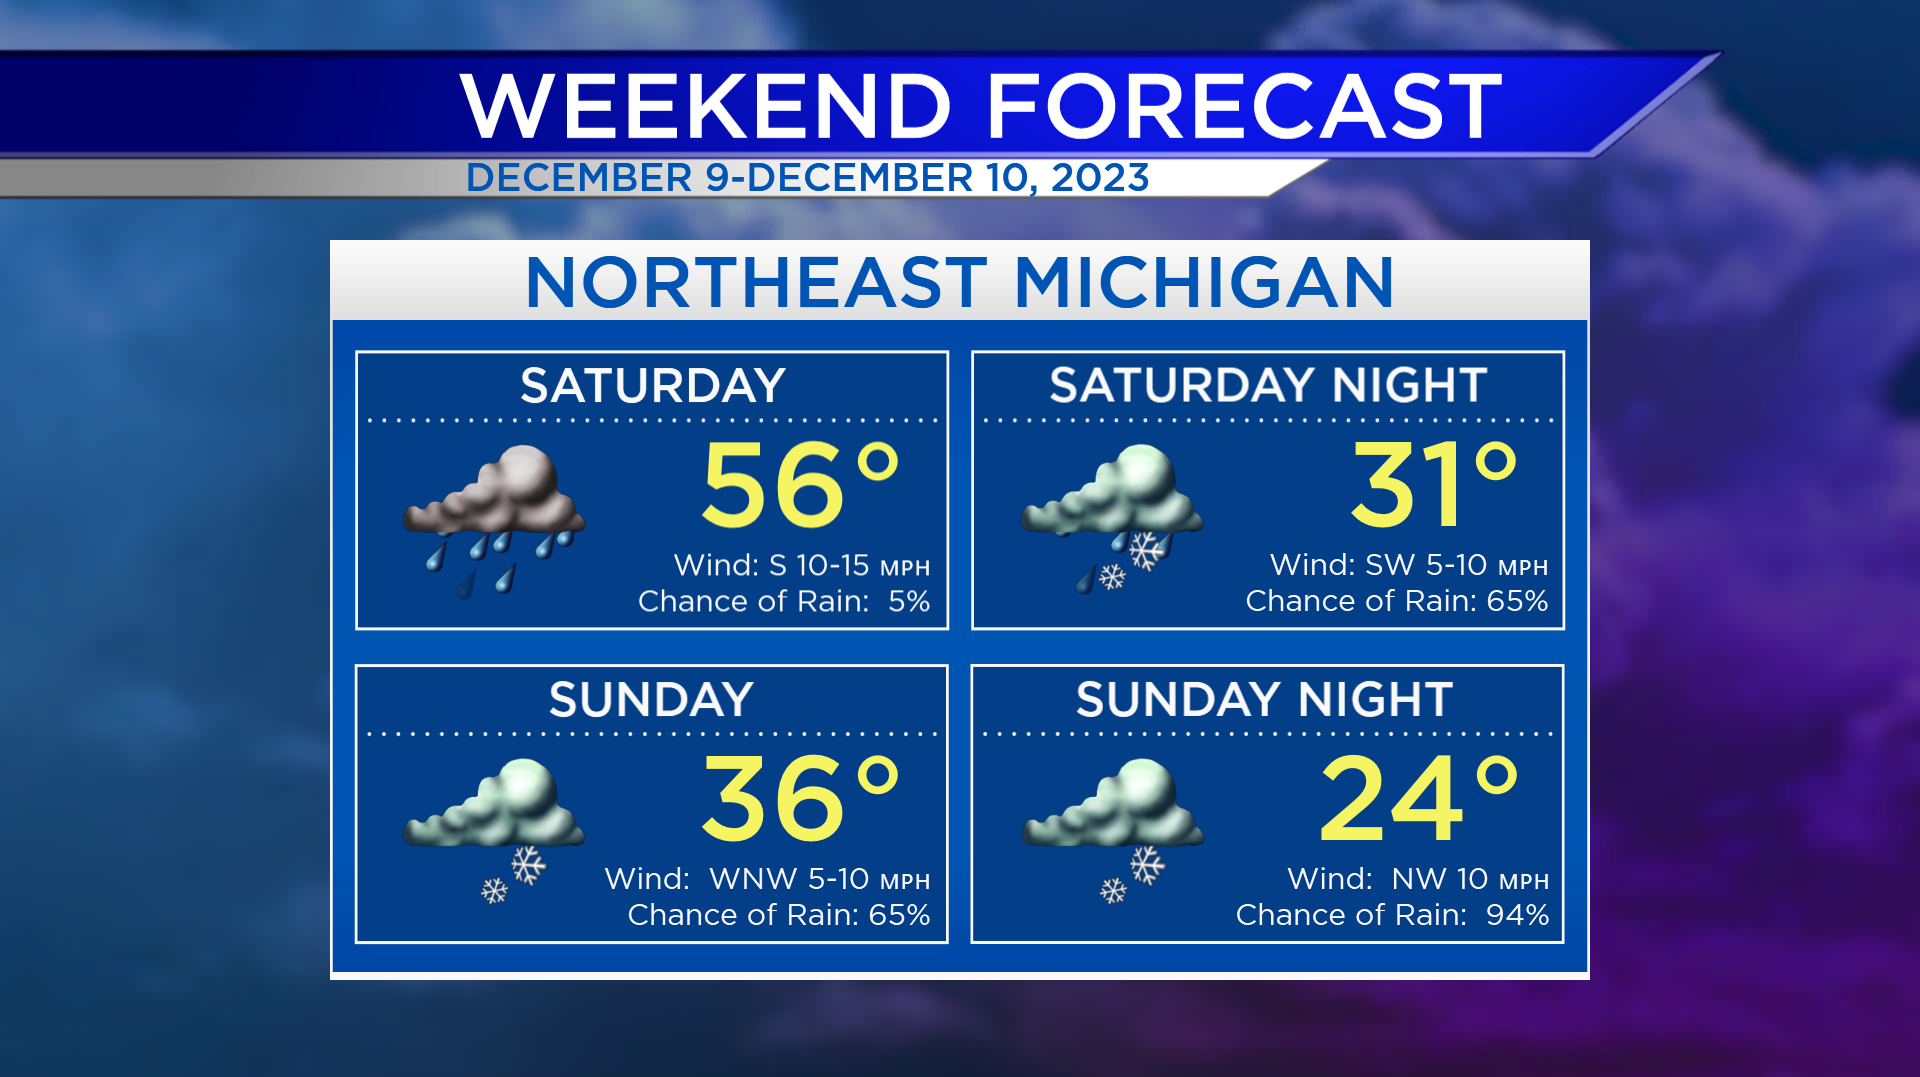 Cloudy and damp Saturday, Forecast